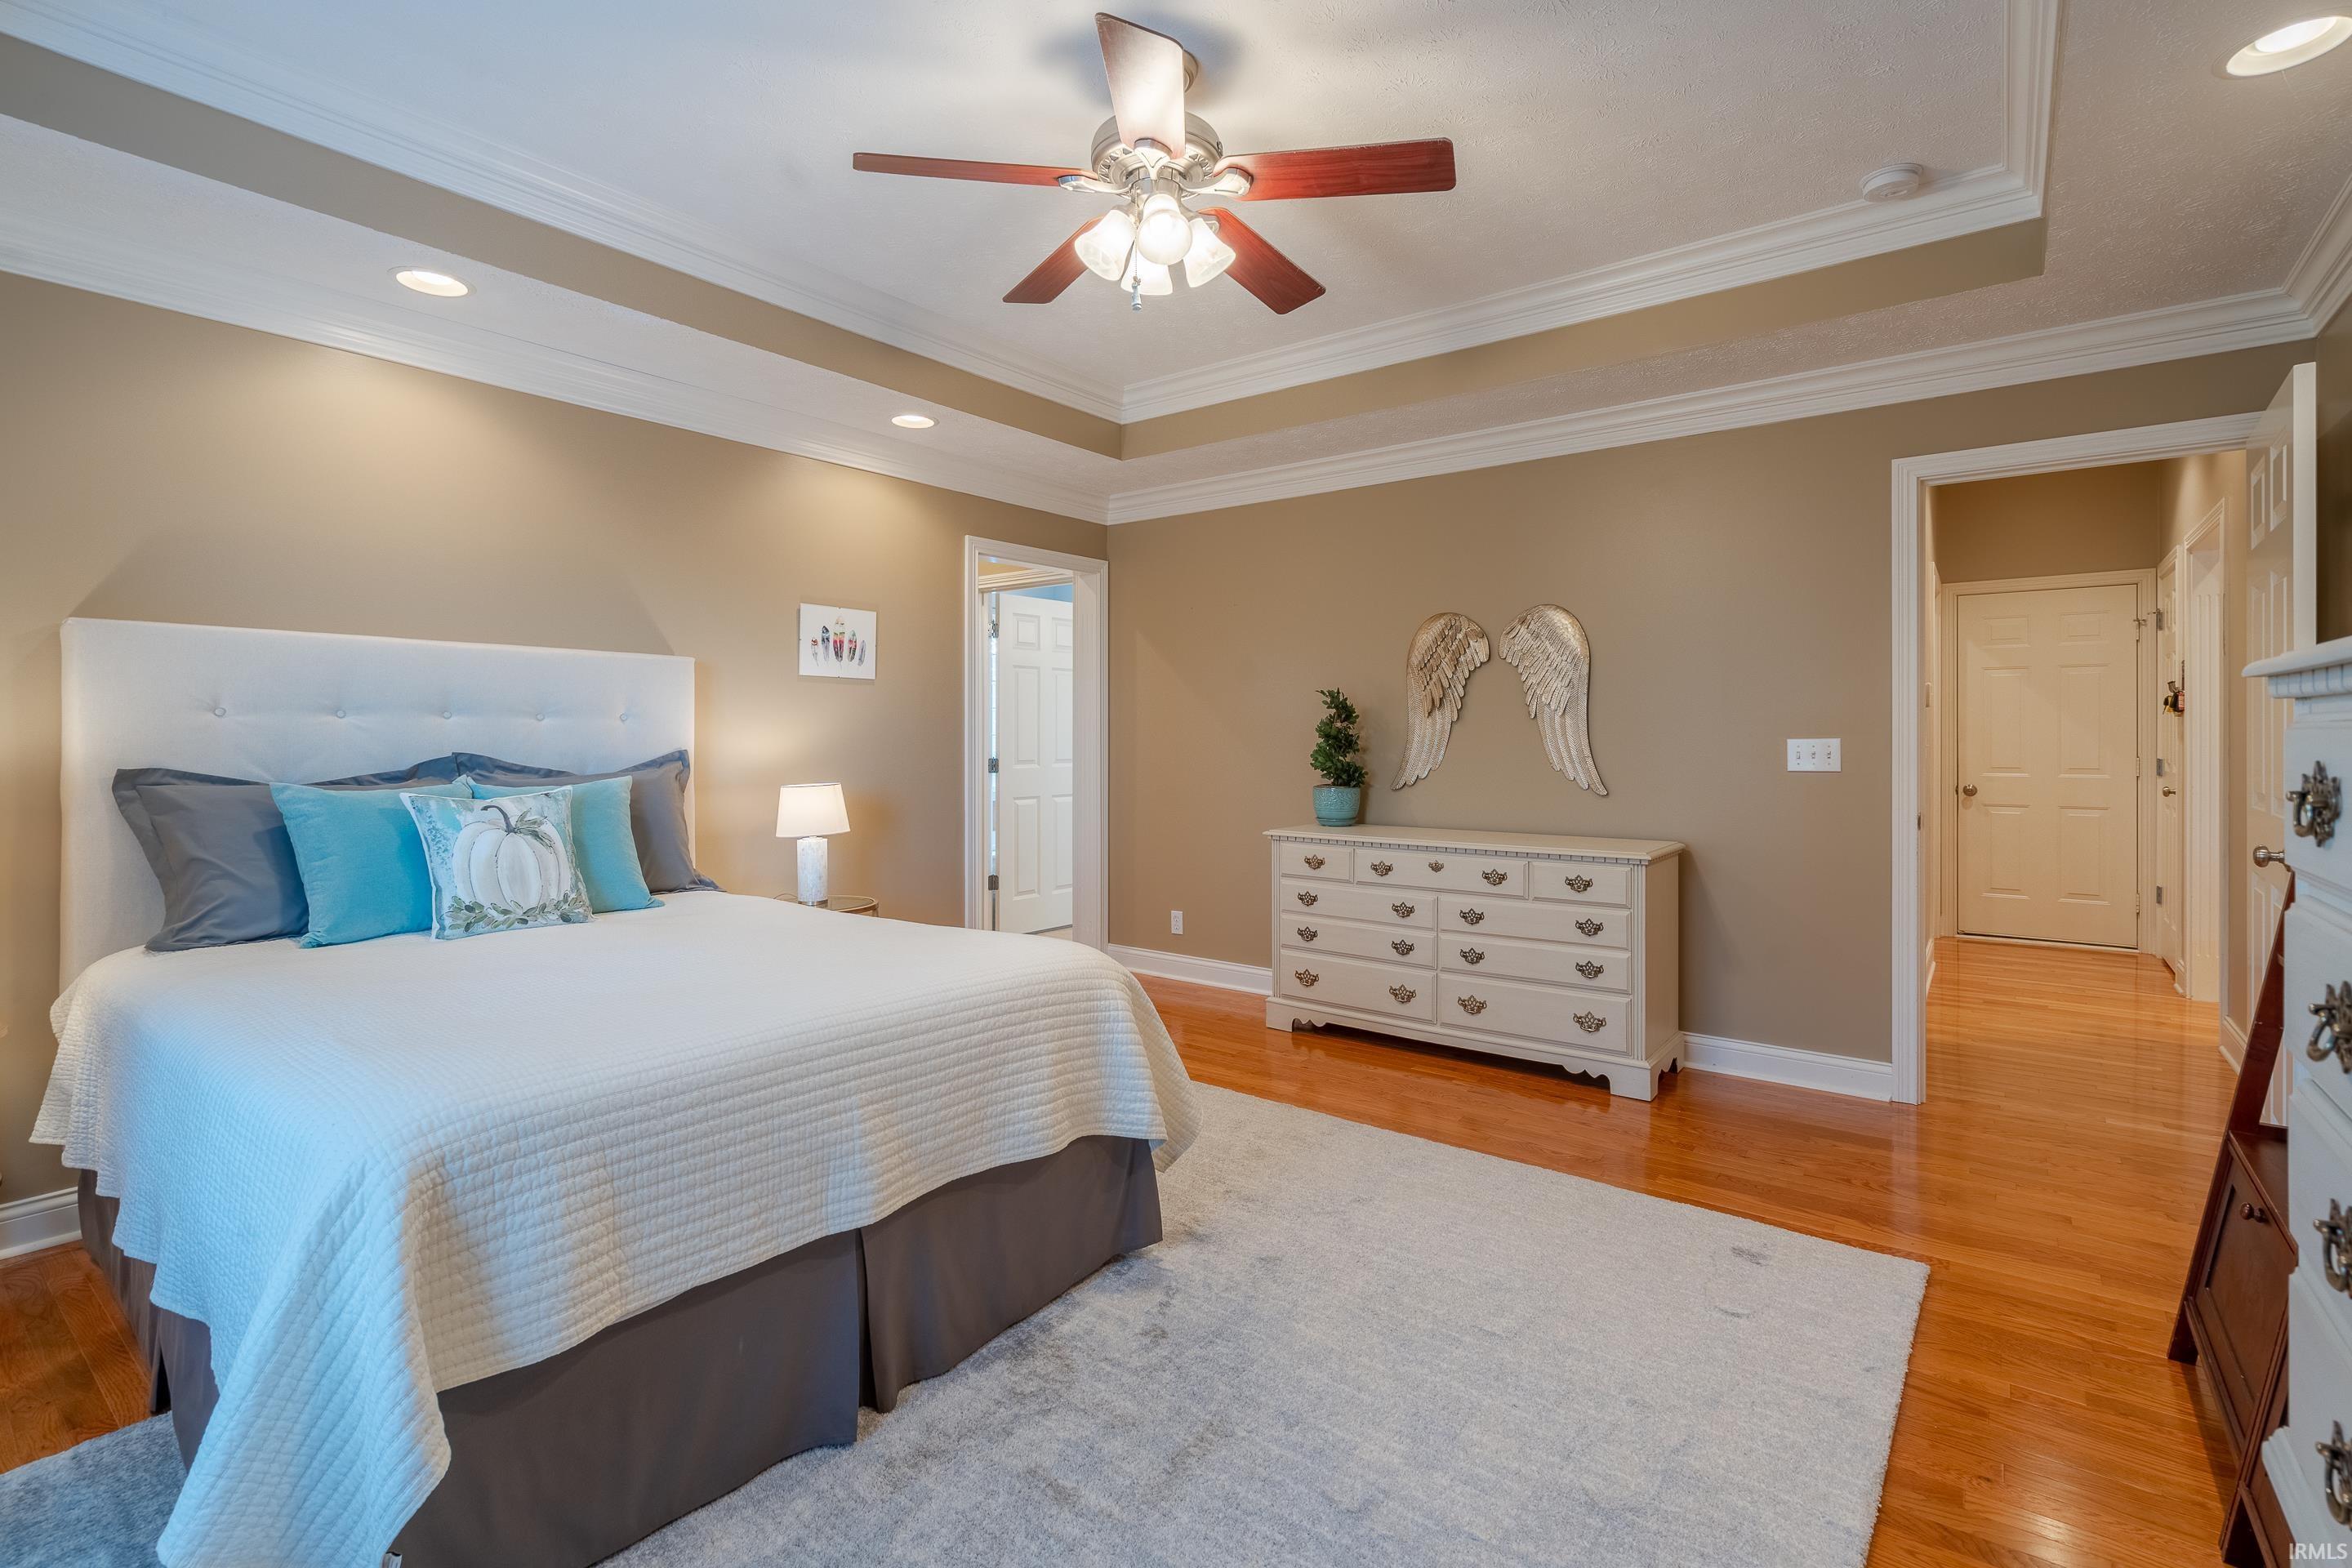 Trey ceiling and crown molding accent primary bedroom.